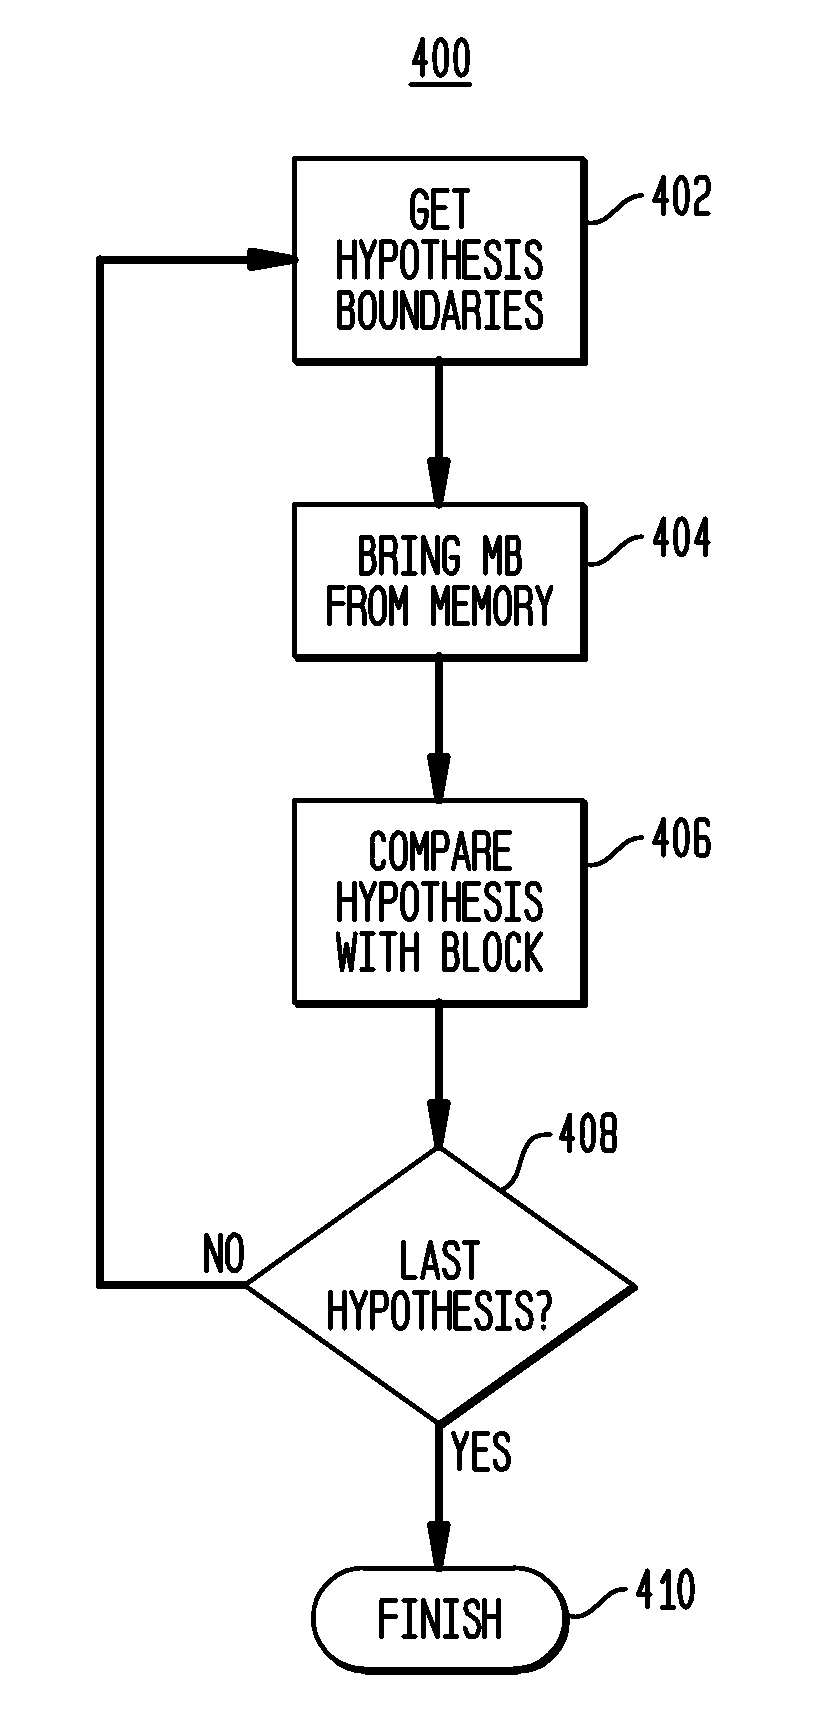 Direct Memory Access With On-The-Fly Generation of Frame Information For Unrestricted Motion Vectors